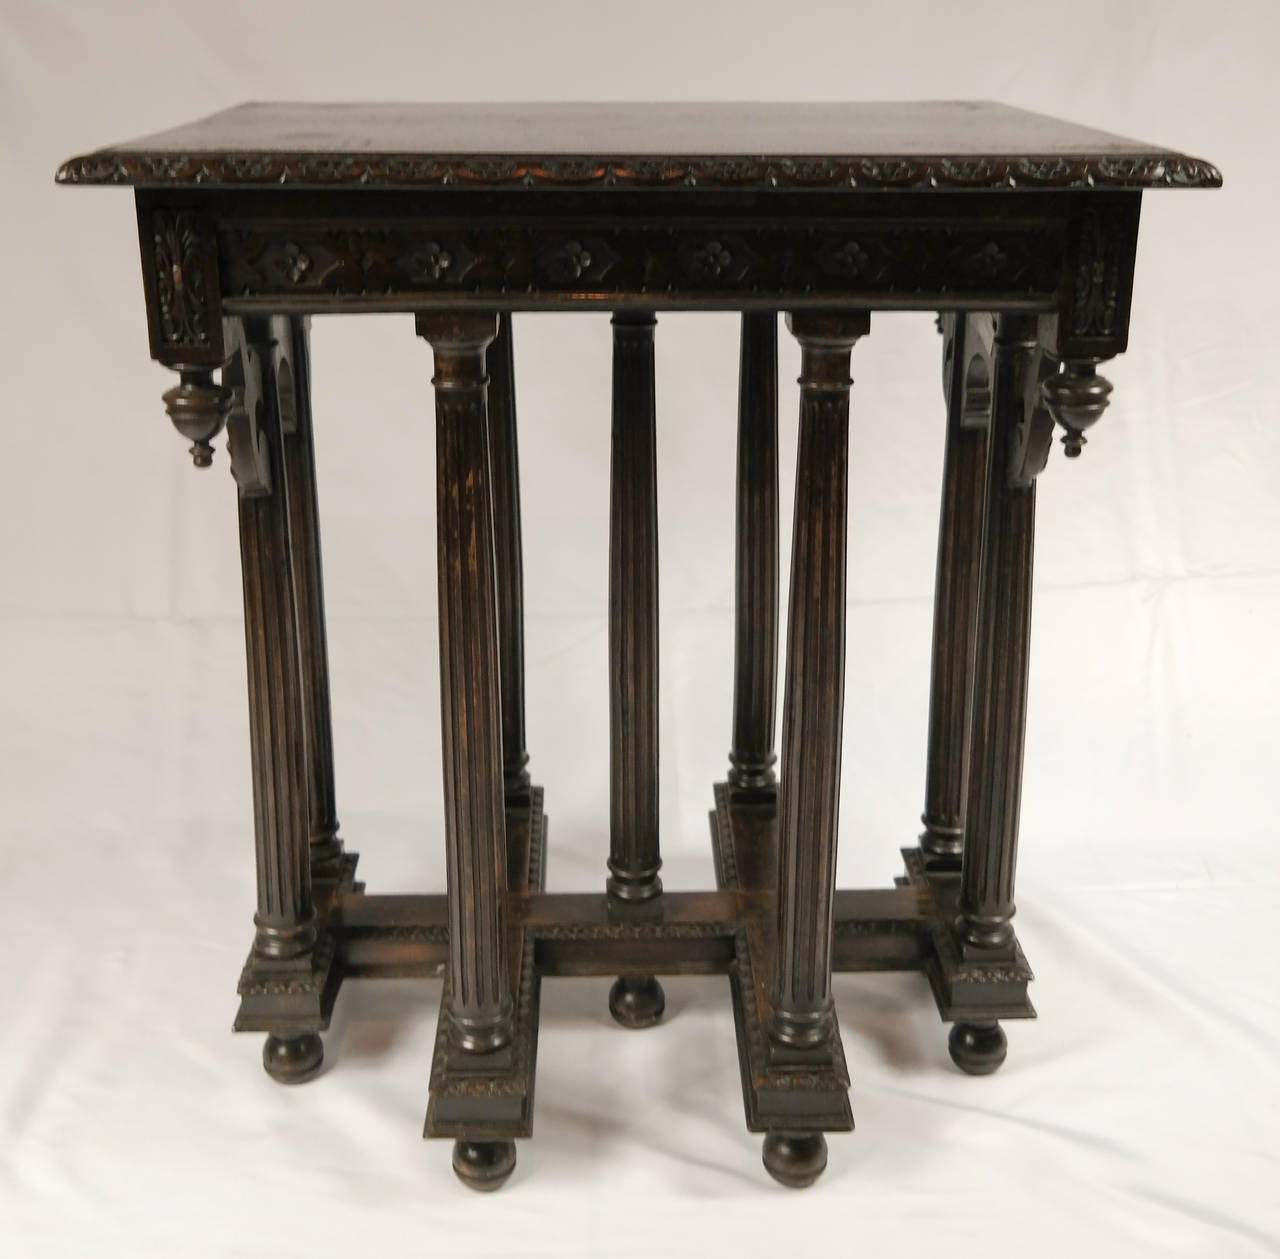 Carved mahogany Greek Revival table with nine reeded columns, English, circa 1880.